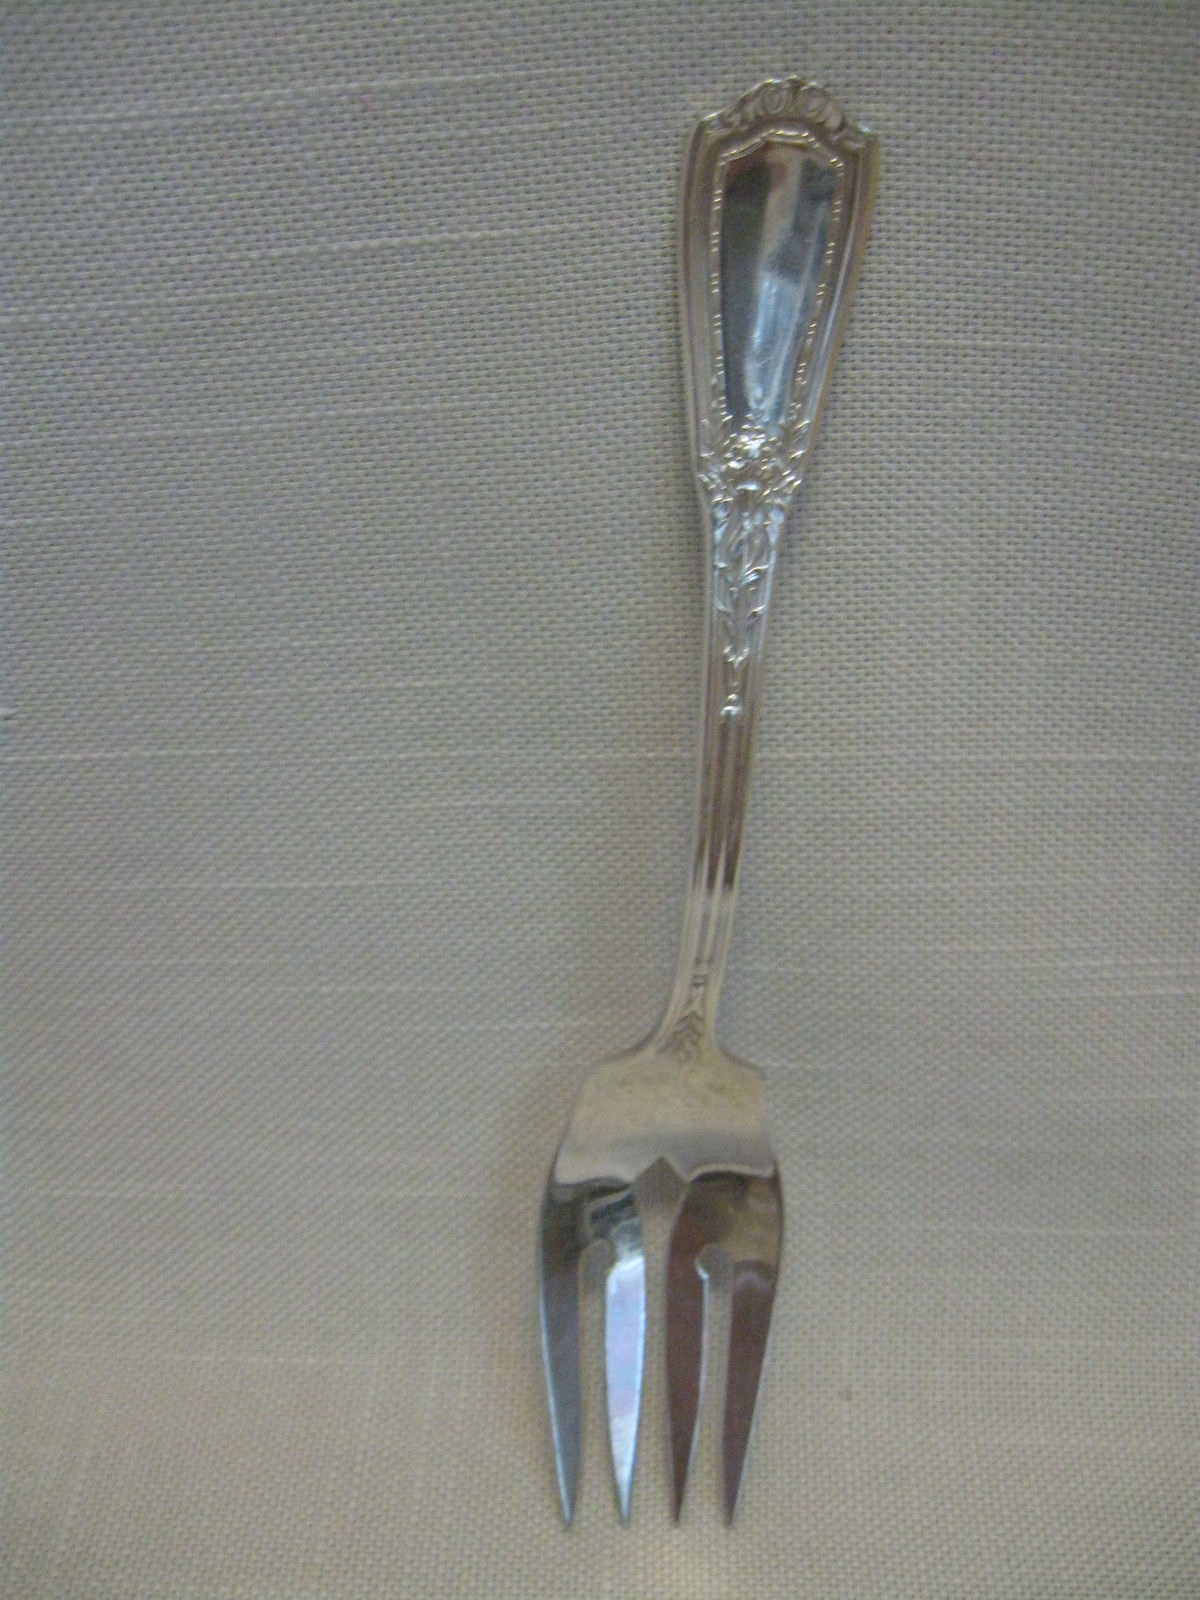 Primary image for Reed & Barton Louis XIV Silver Plate Salad Fork 6" Flat Ware 1926